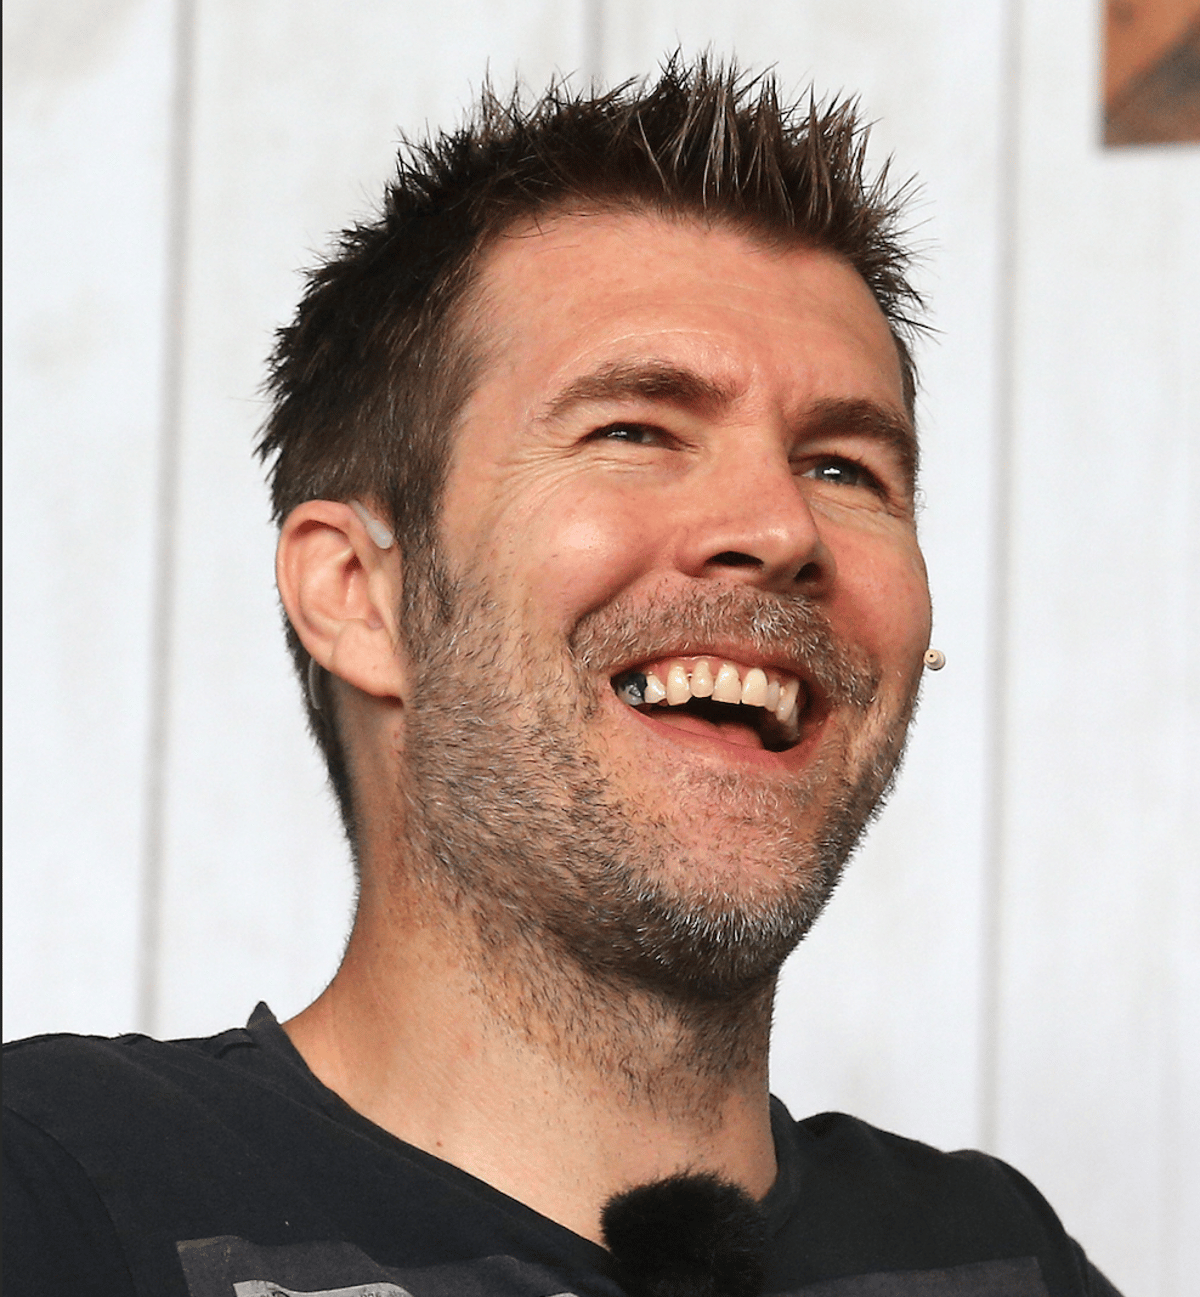 Comedian Rhod Gilbert confirms stage 4 cancer diagnosis